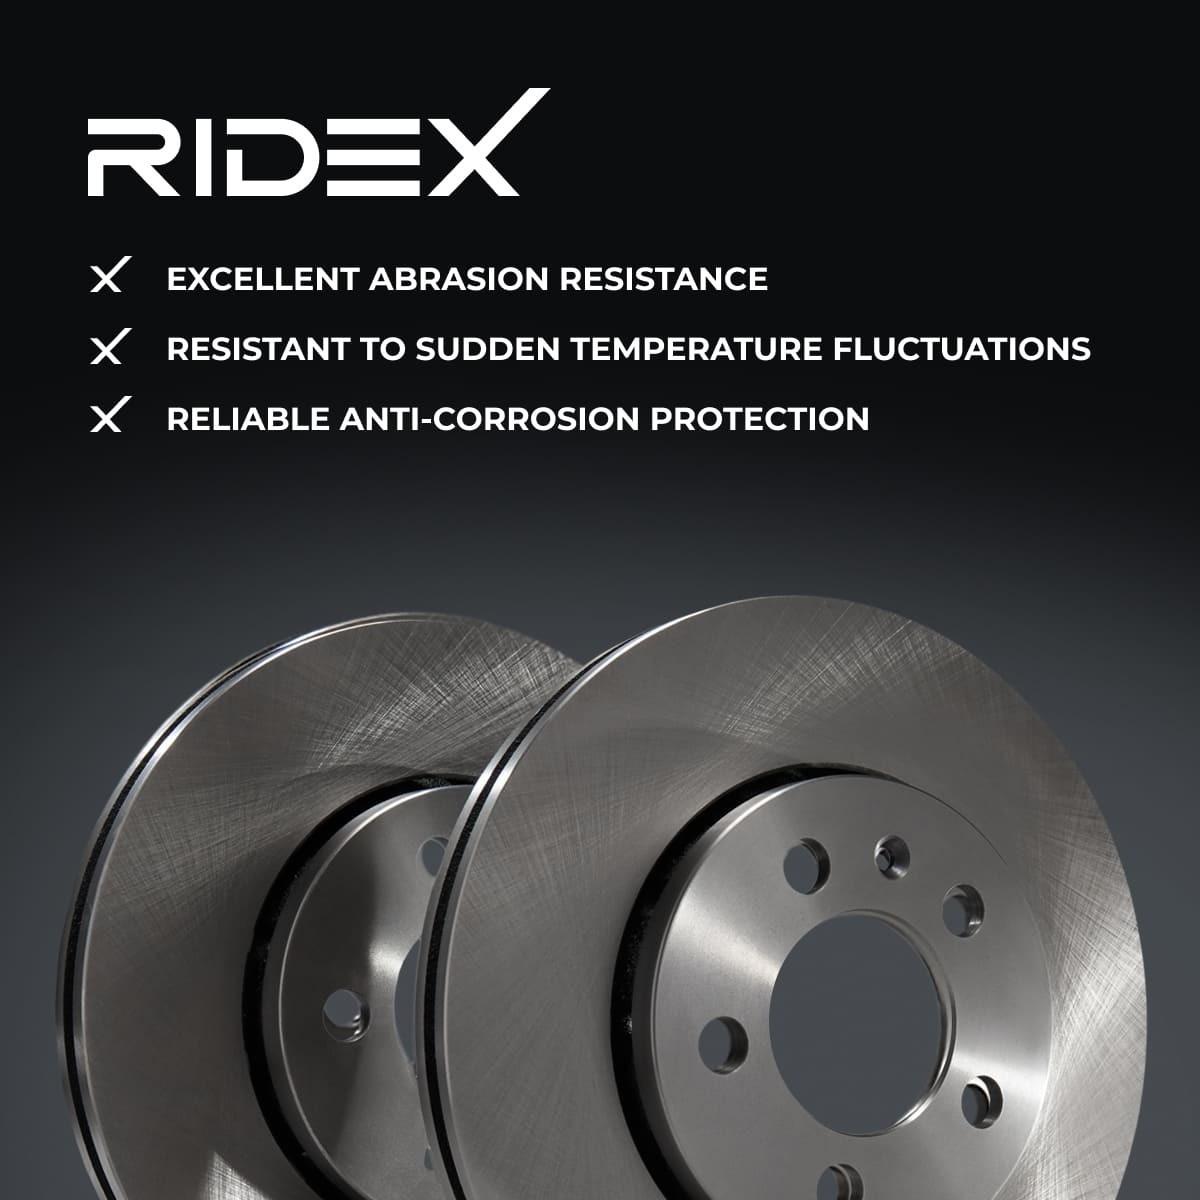 RIDEX 82B0152 Brake rotor Rear Axle, 292,0x20mm, 5/8x110, Vented, Uncoated